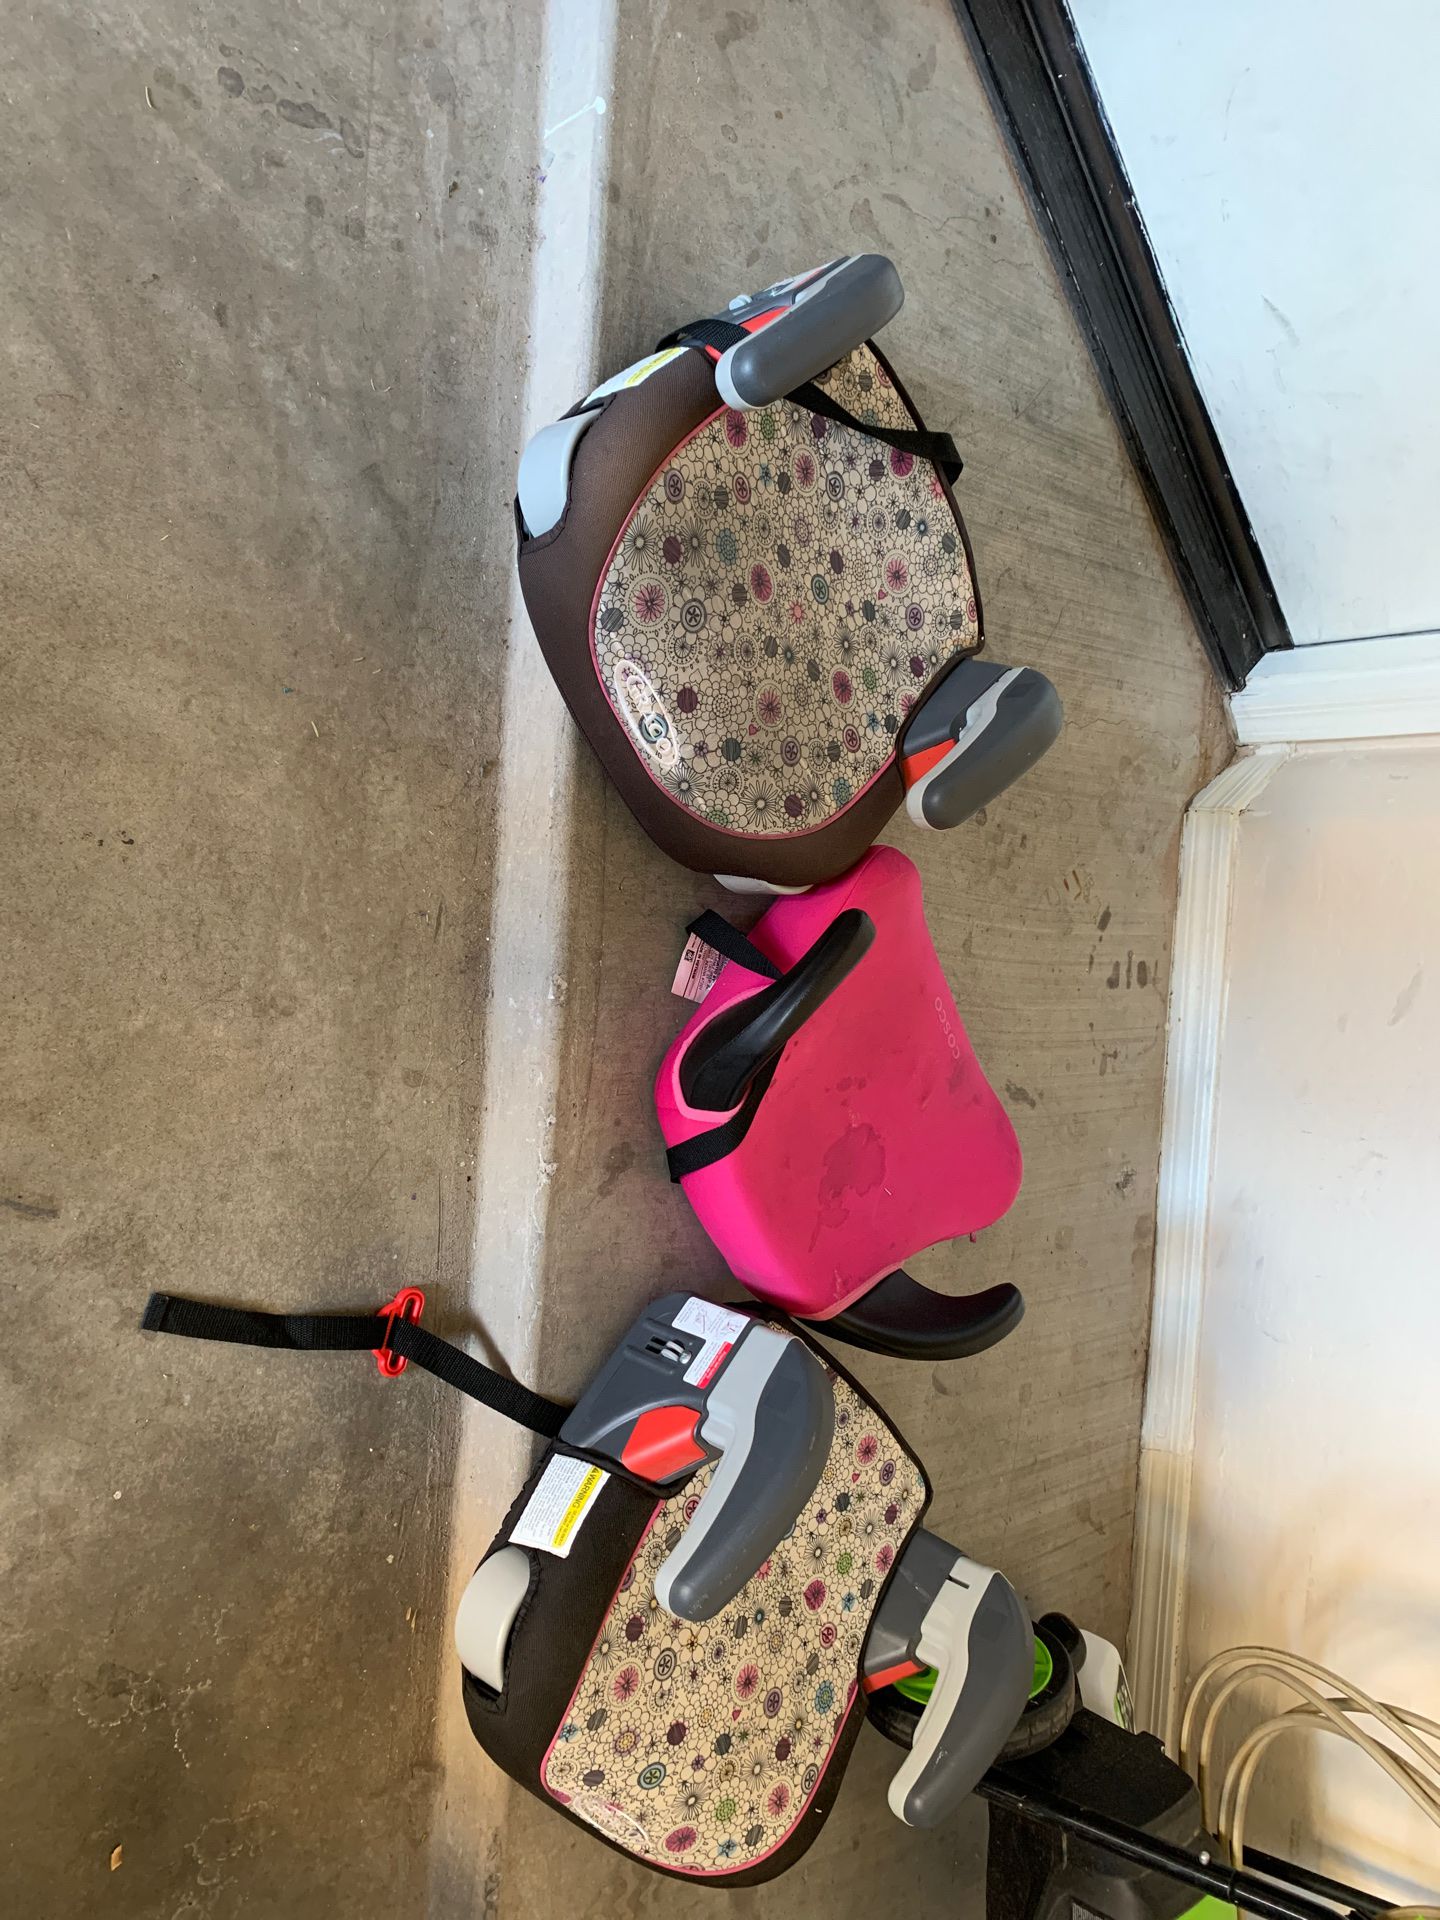 2 Graco car seats and 1 cosco car seat - $25 for all